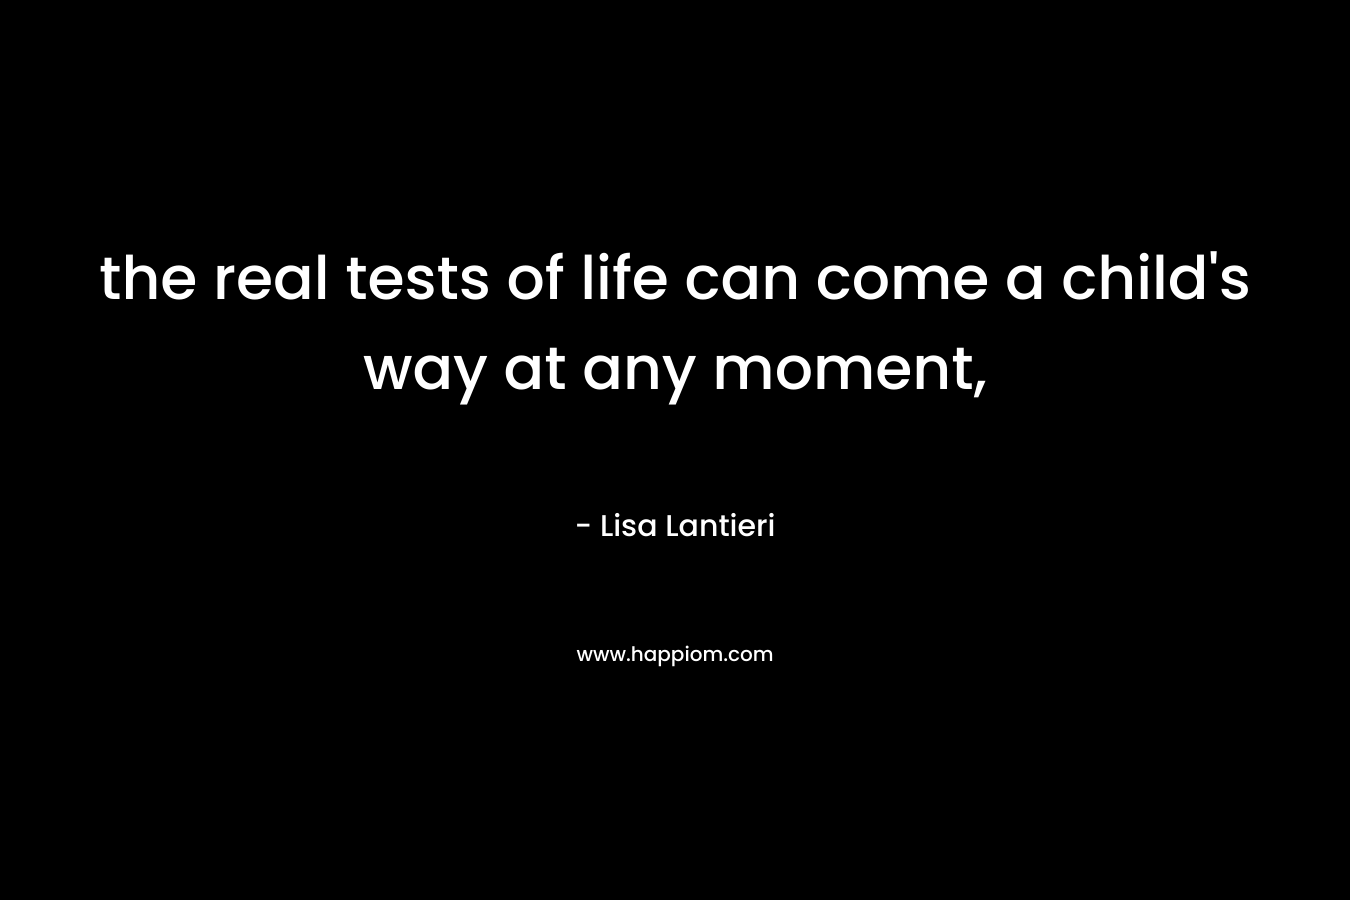 the real tests of life can come a child's way at any moment,